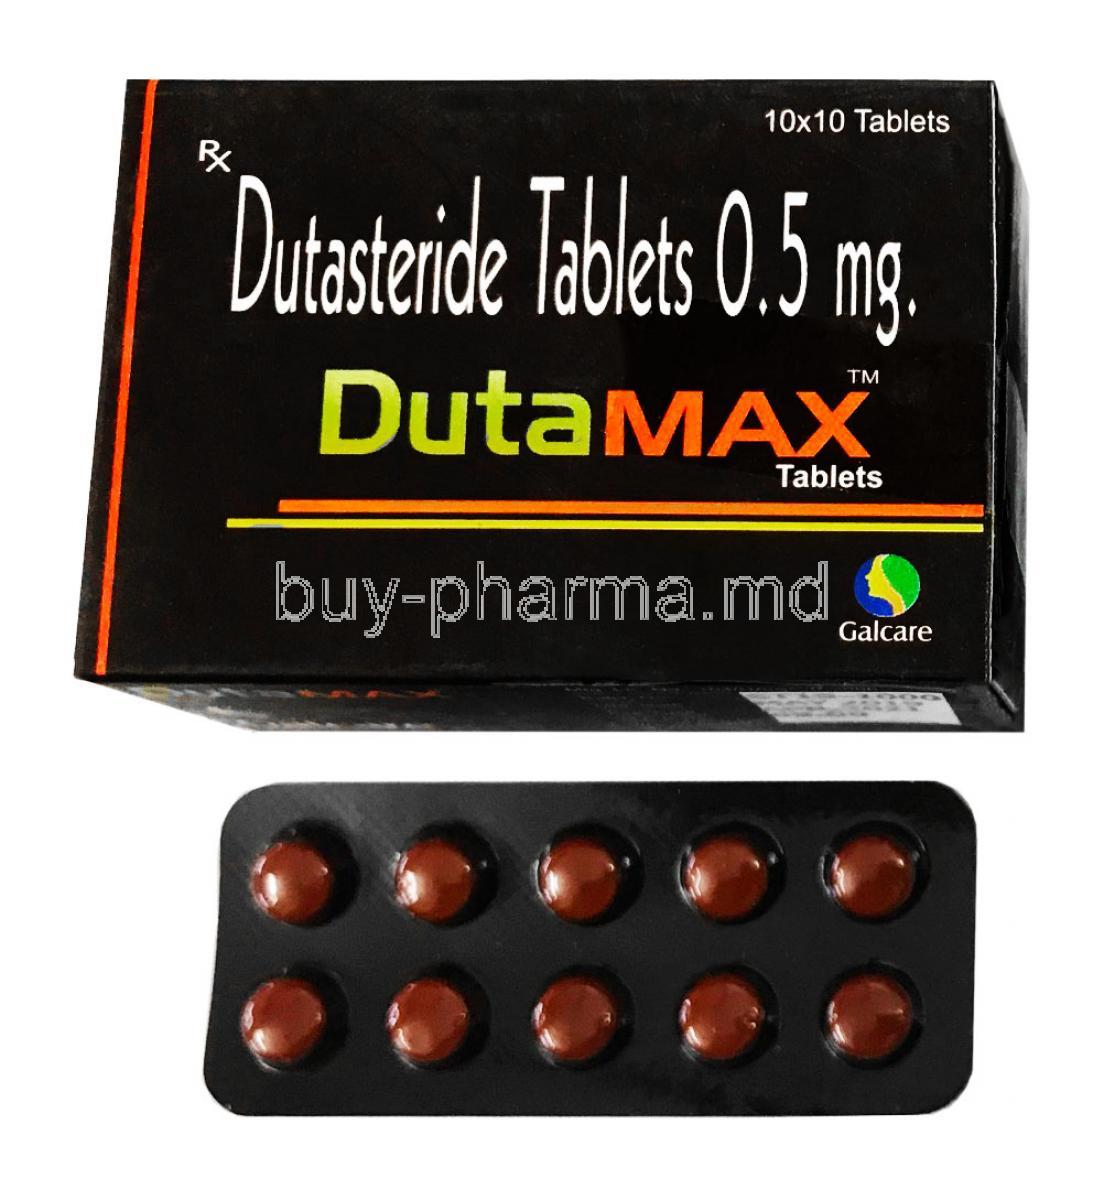 Dutamax, Dutasteride 0.5mg box and tablets